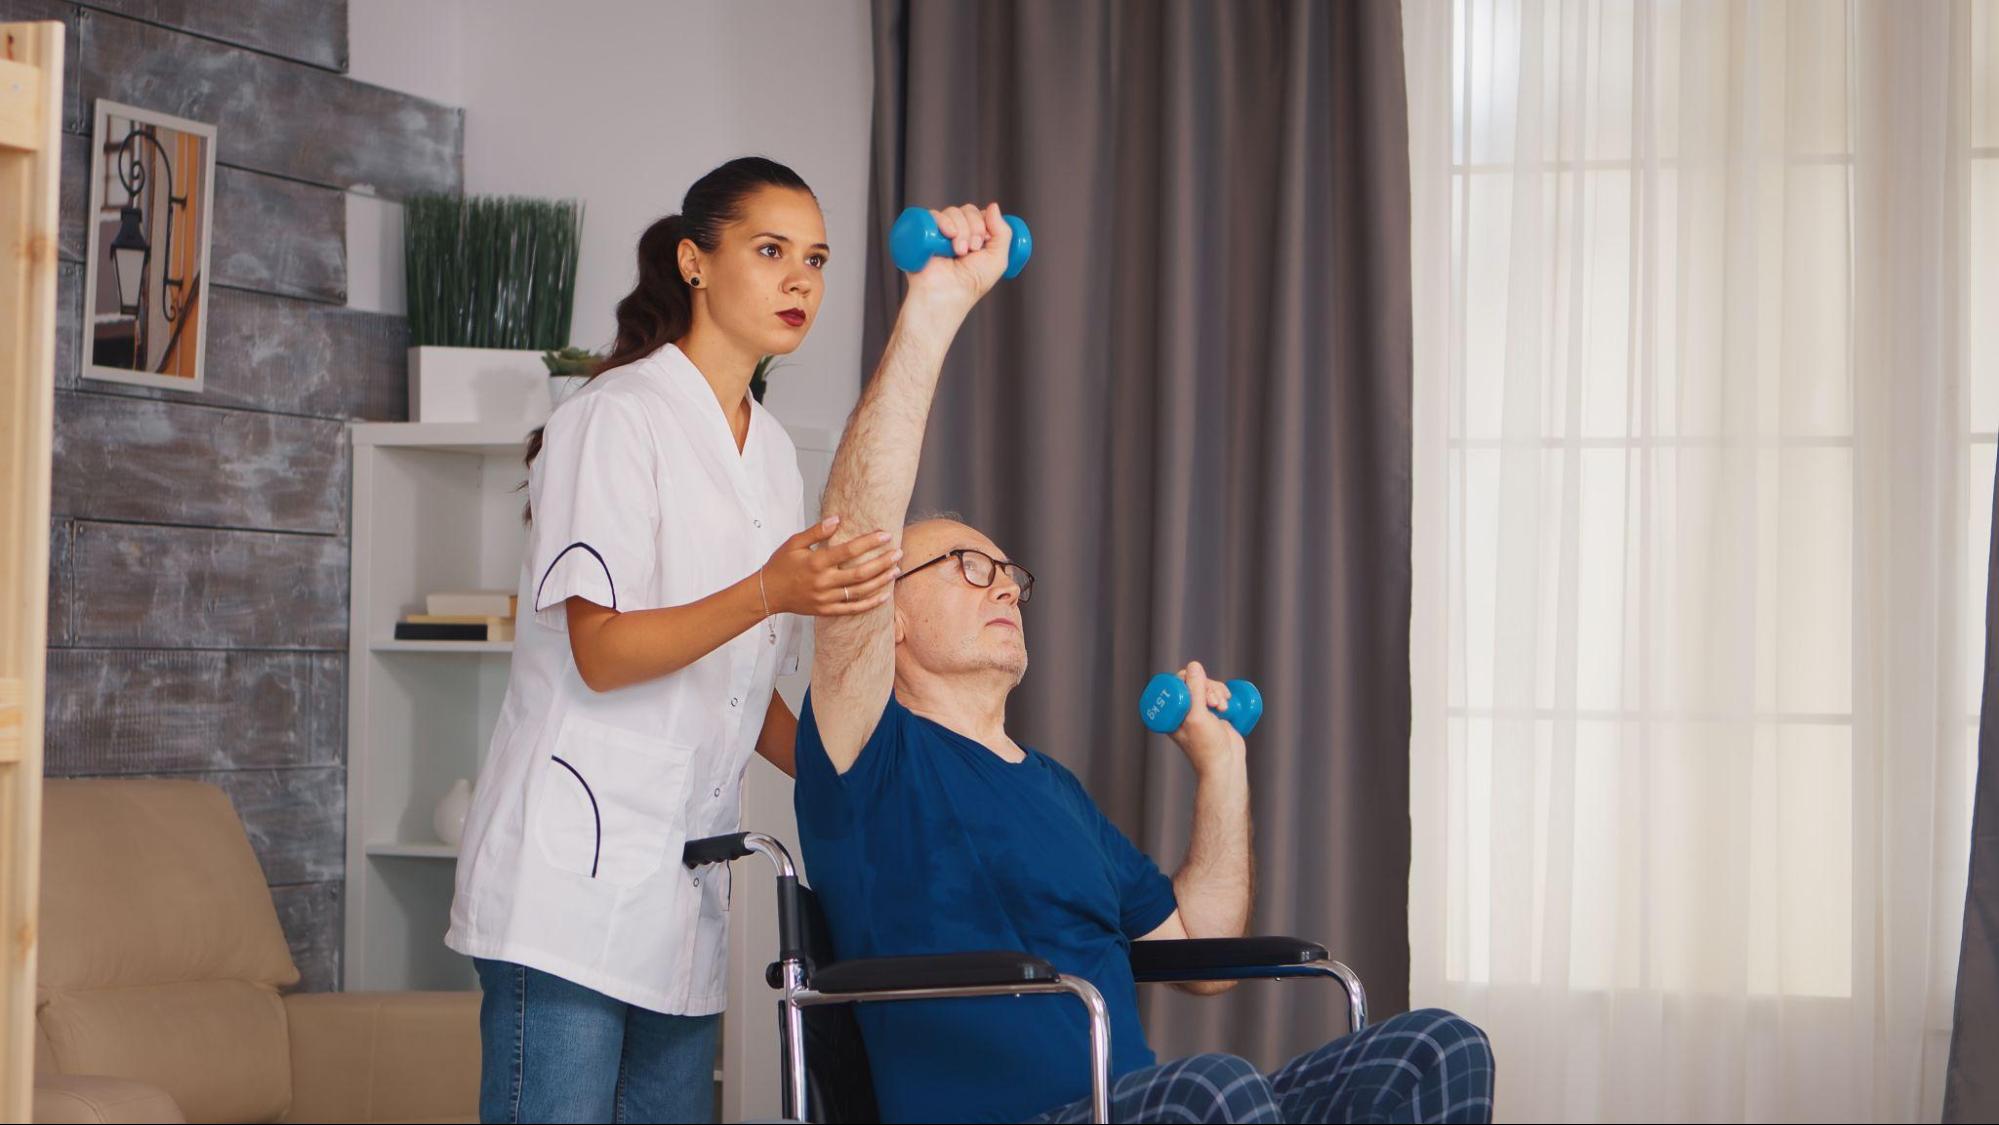 therapist helping individual on wheelchair with hand exercise using dumbbell